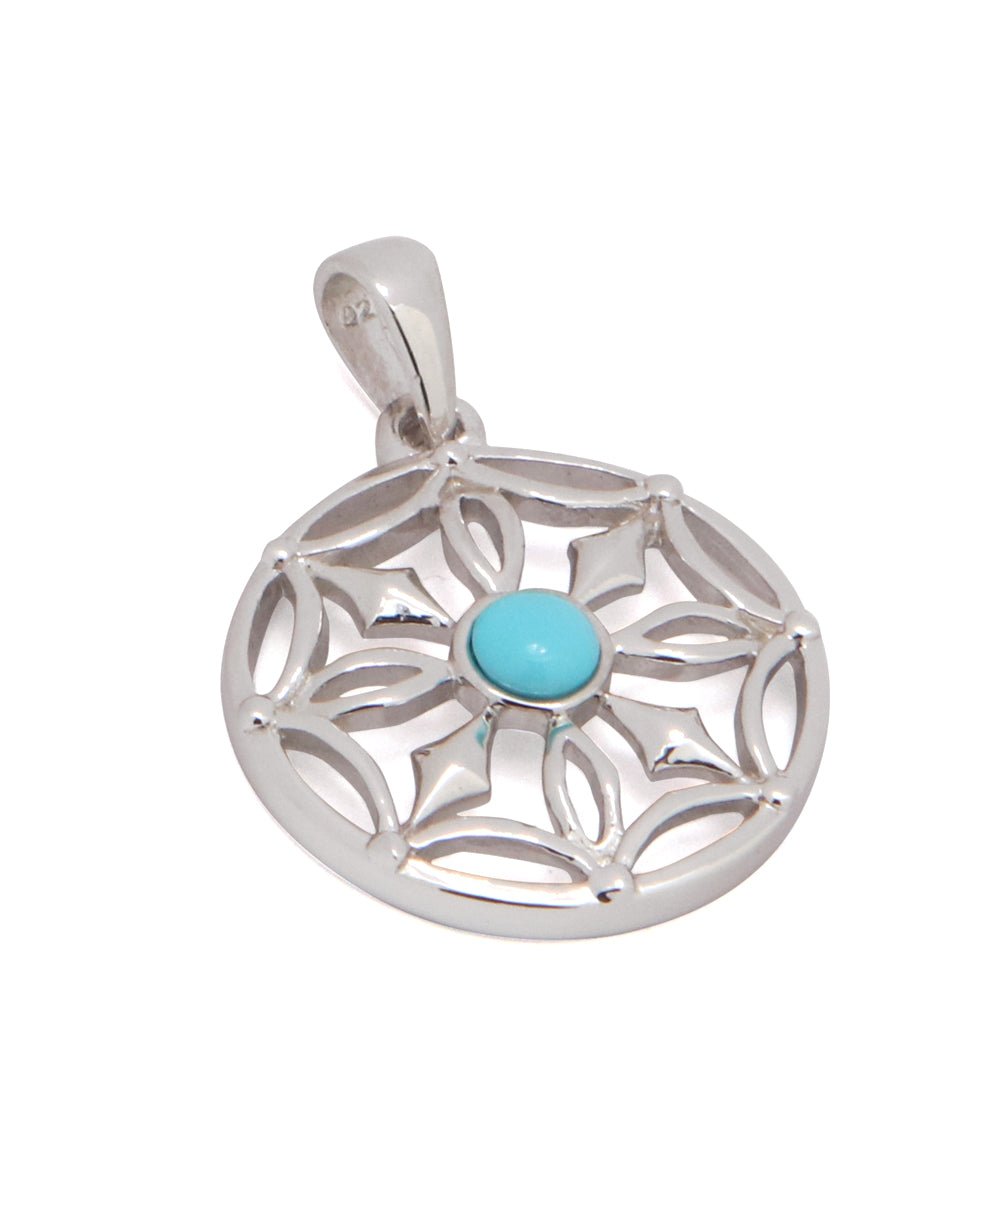 Dharma Wheel Pendant in Sterling Silver and Turquoise - Charms & Pendants